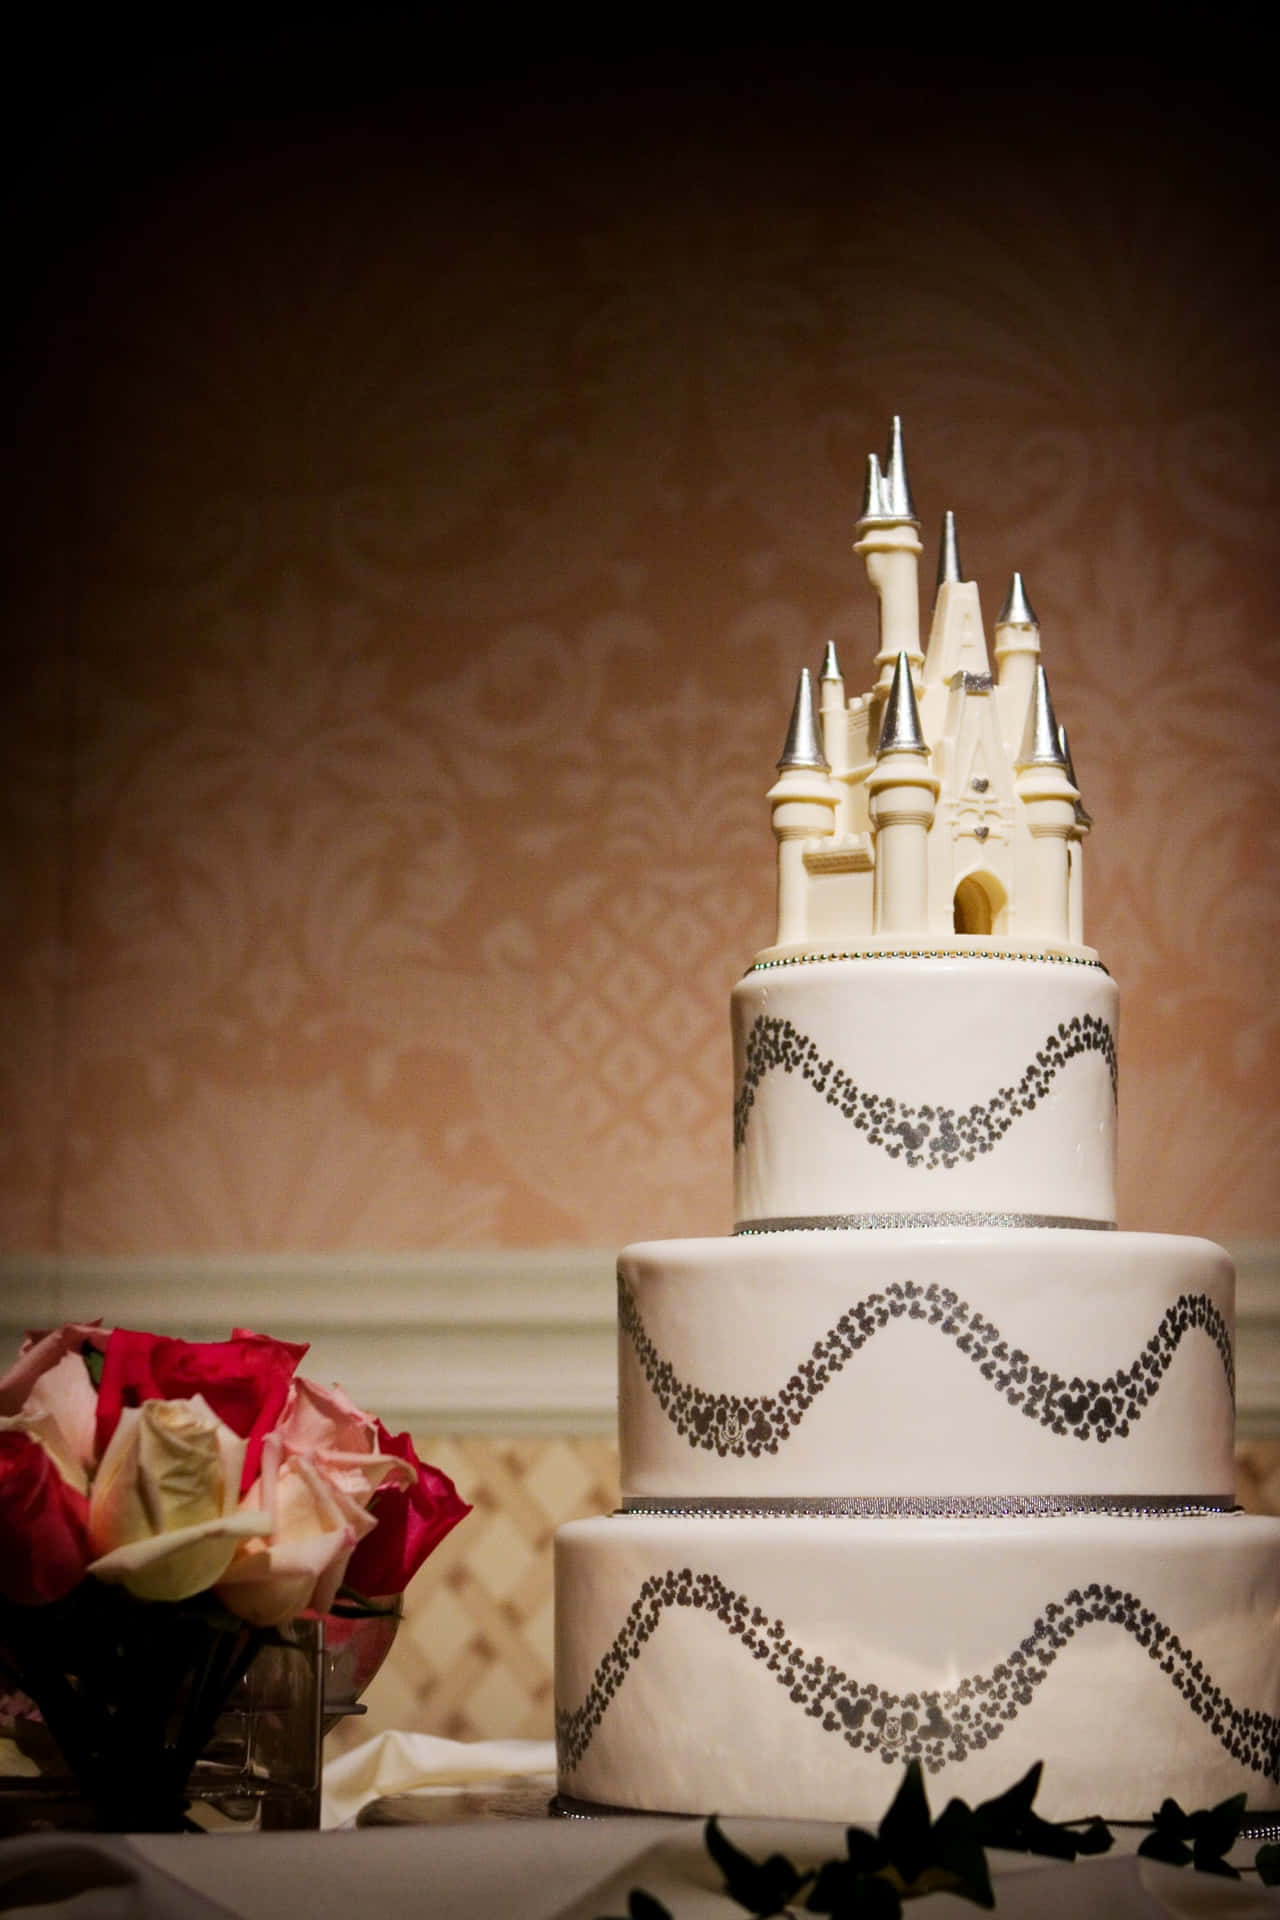 A decadent, three-tiered Wedding Cake adorned with roses and ivory drapes